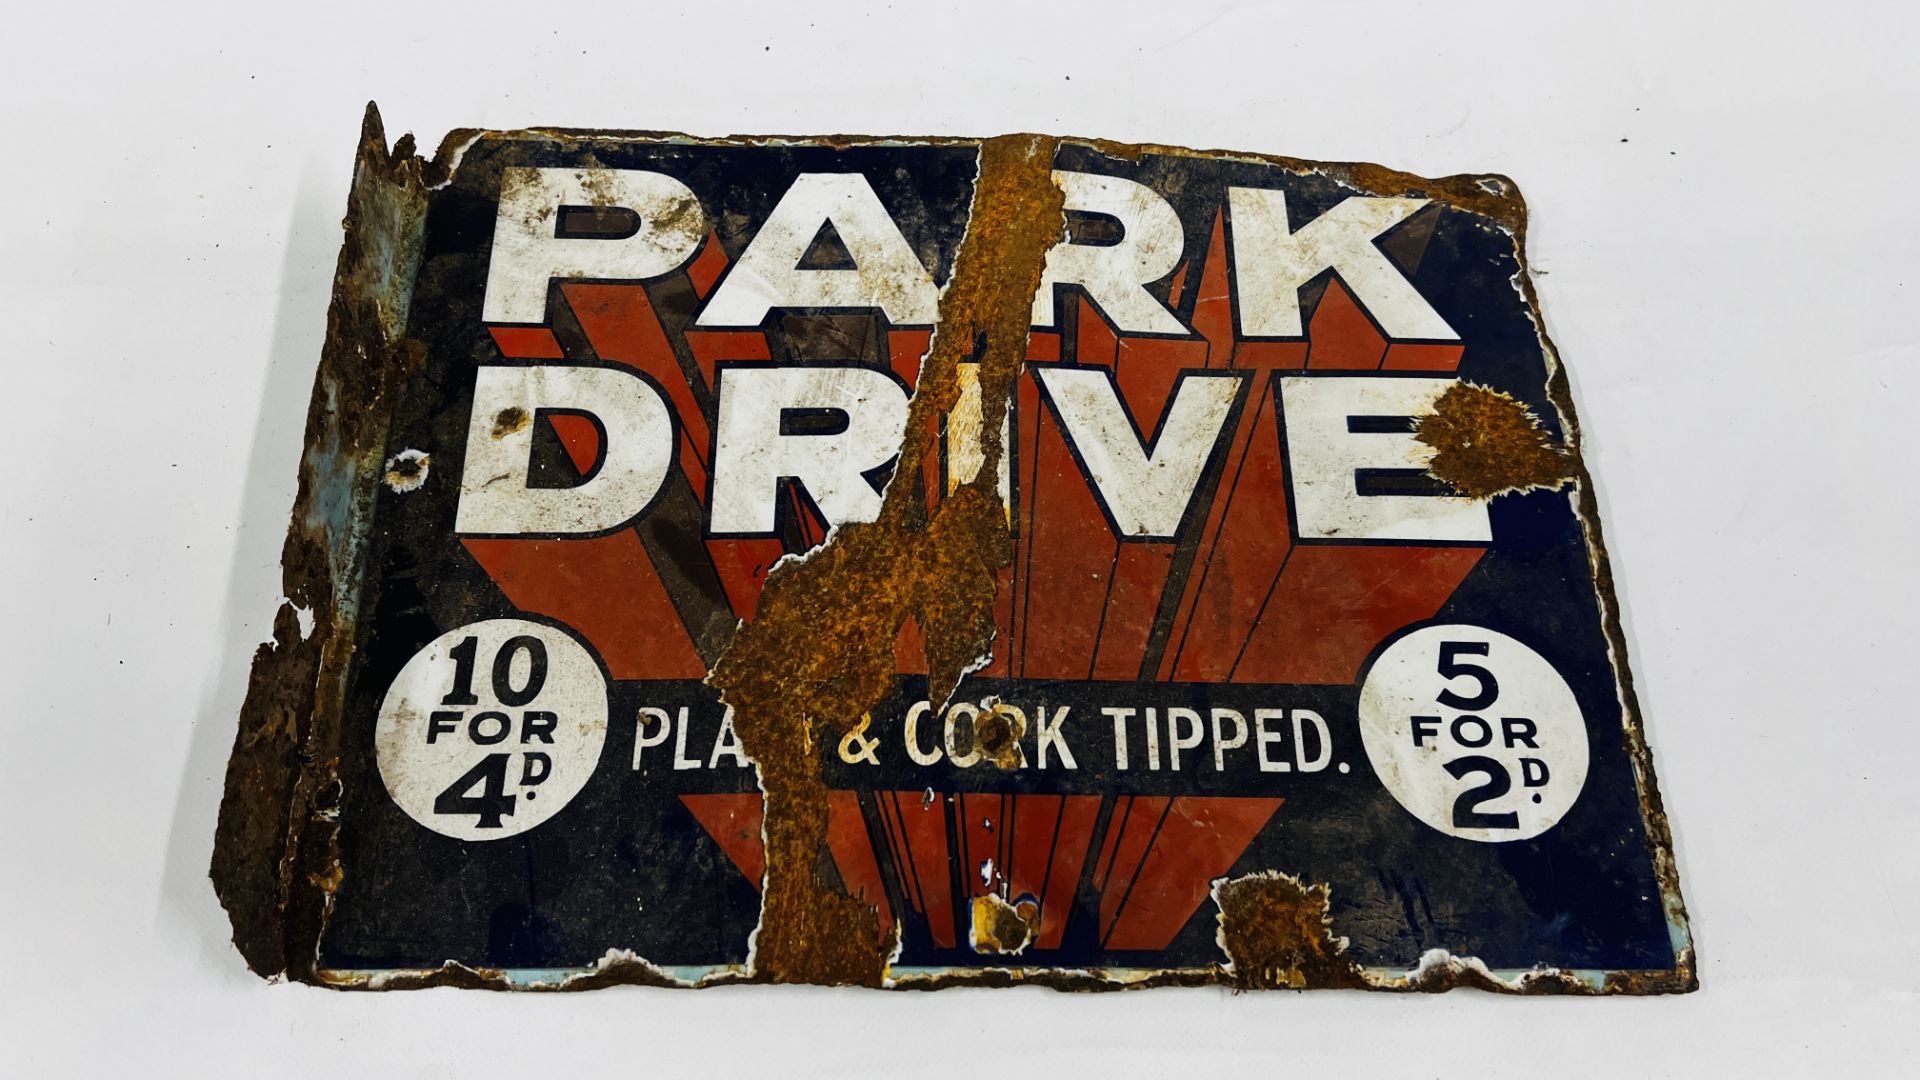 AN ORIGINAL VINTAGE DOUBLE SIDED ENAMEL SIGN "PARK DRIVE" PLAIN & CORK TIPPED (SIGNS OF EXTENSIVE - Image 8 of 13